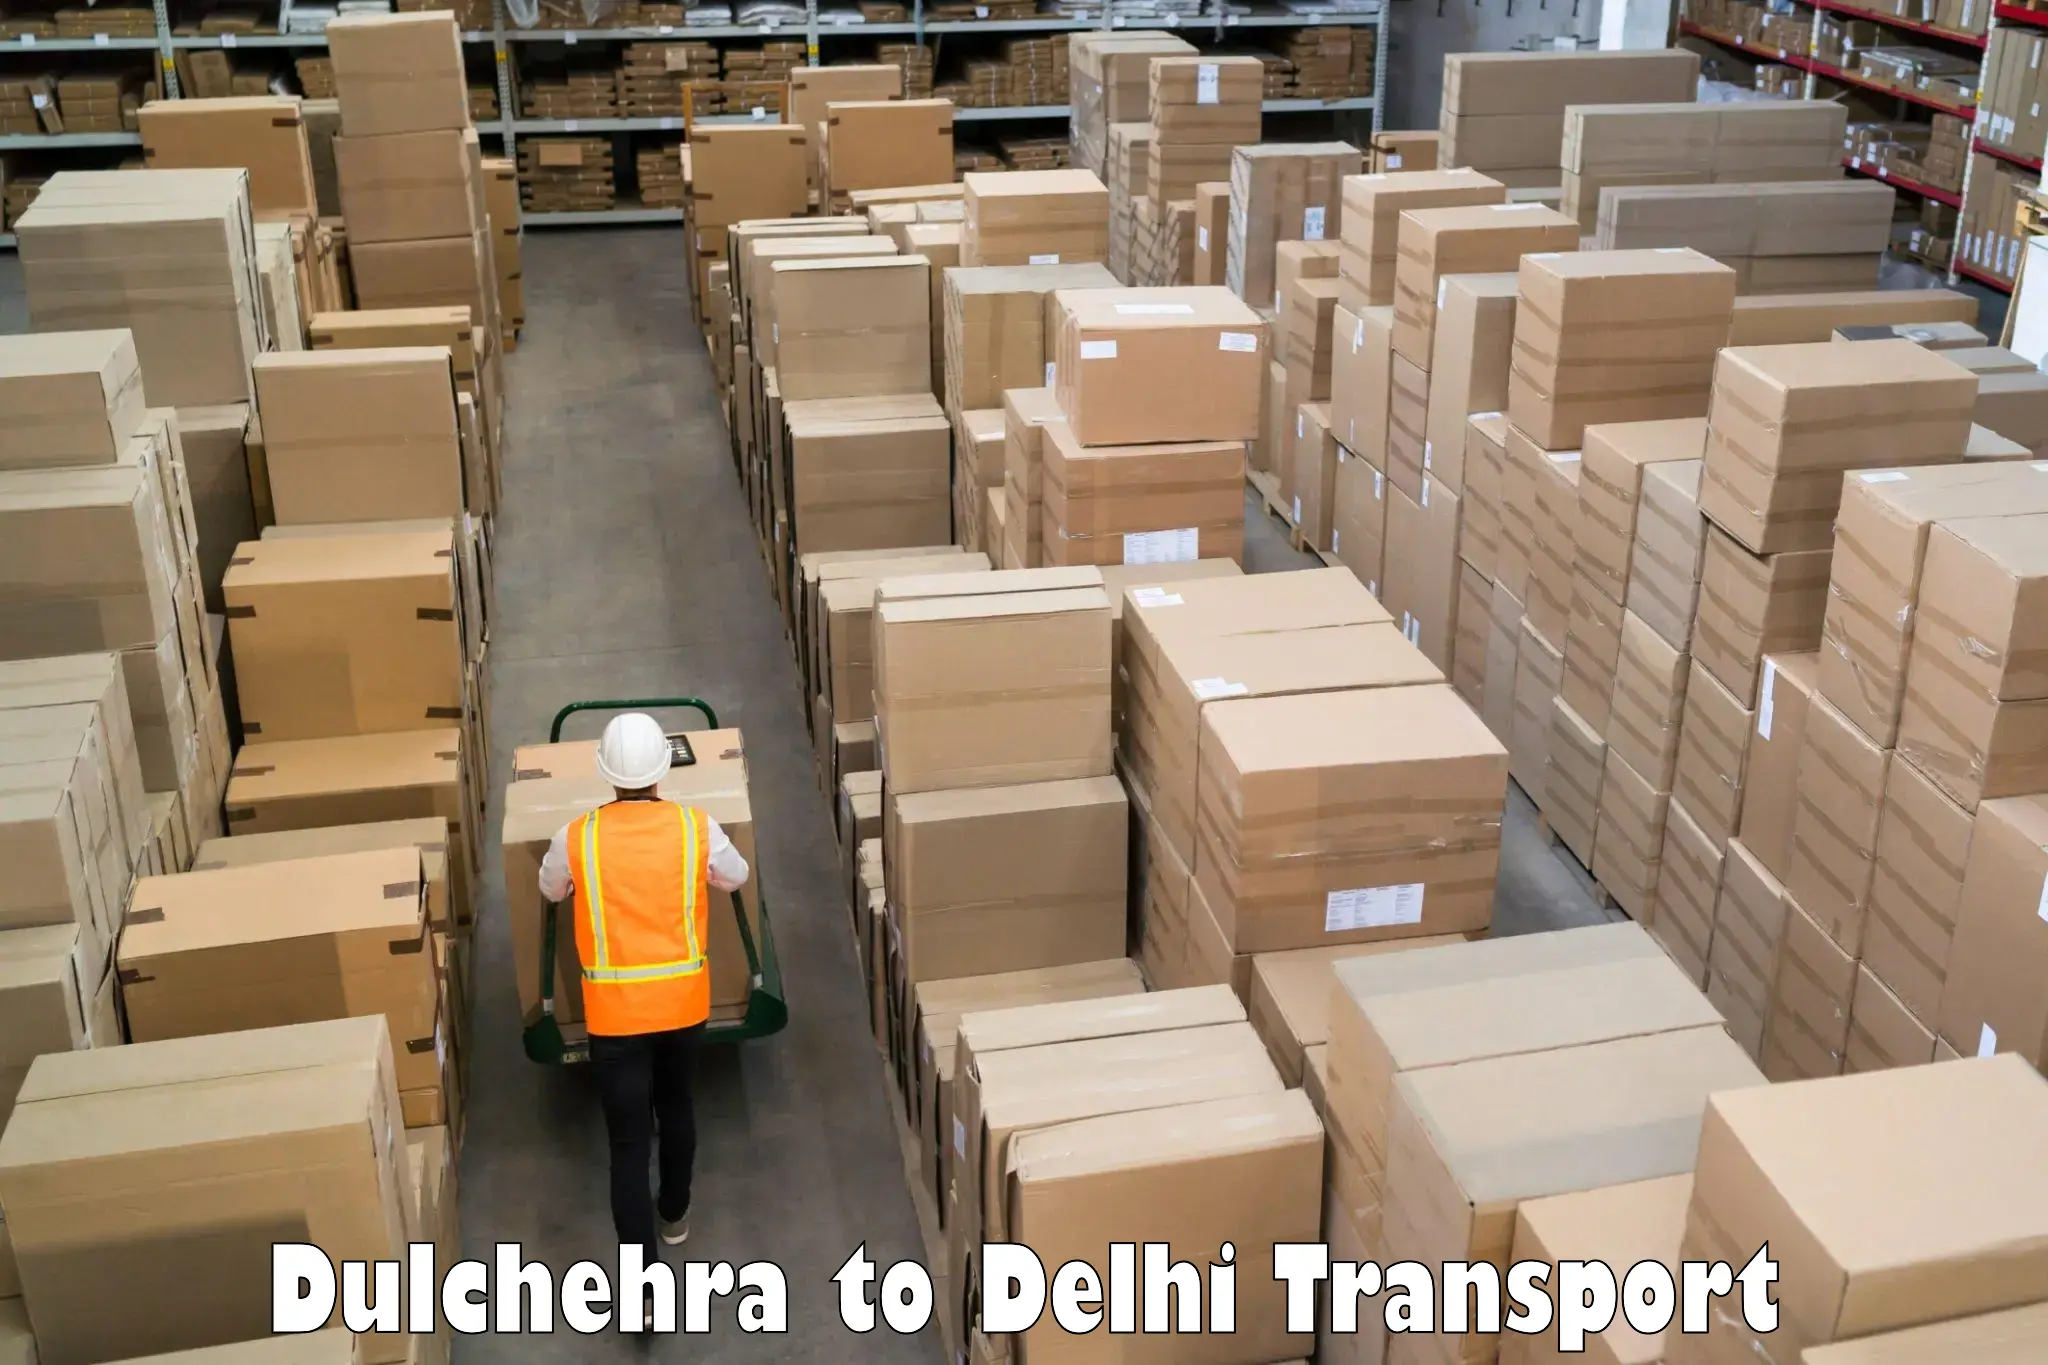 Air freight transport services Dulchehra to NCR